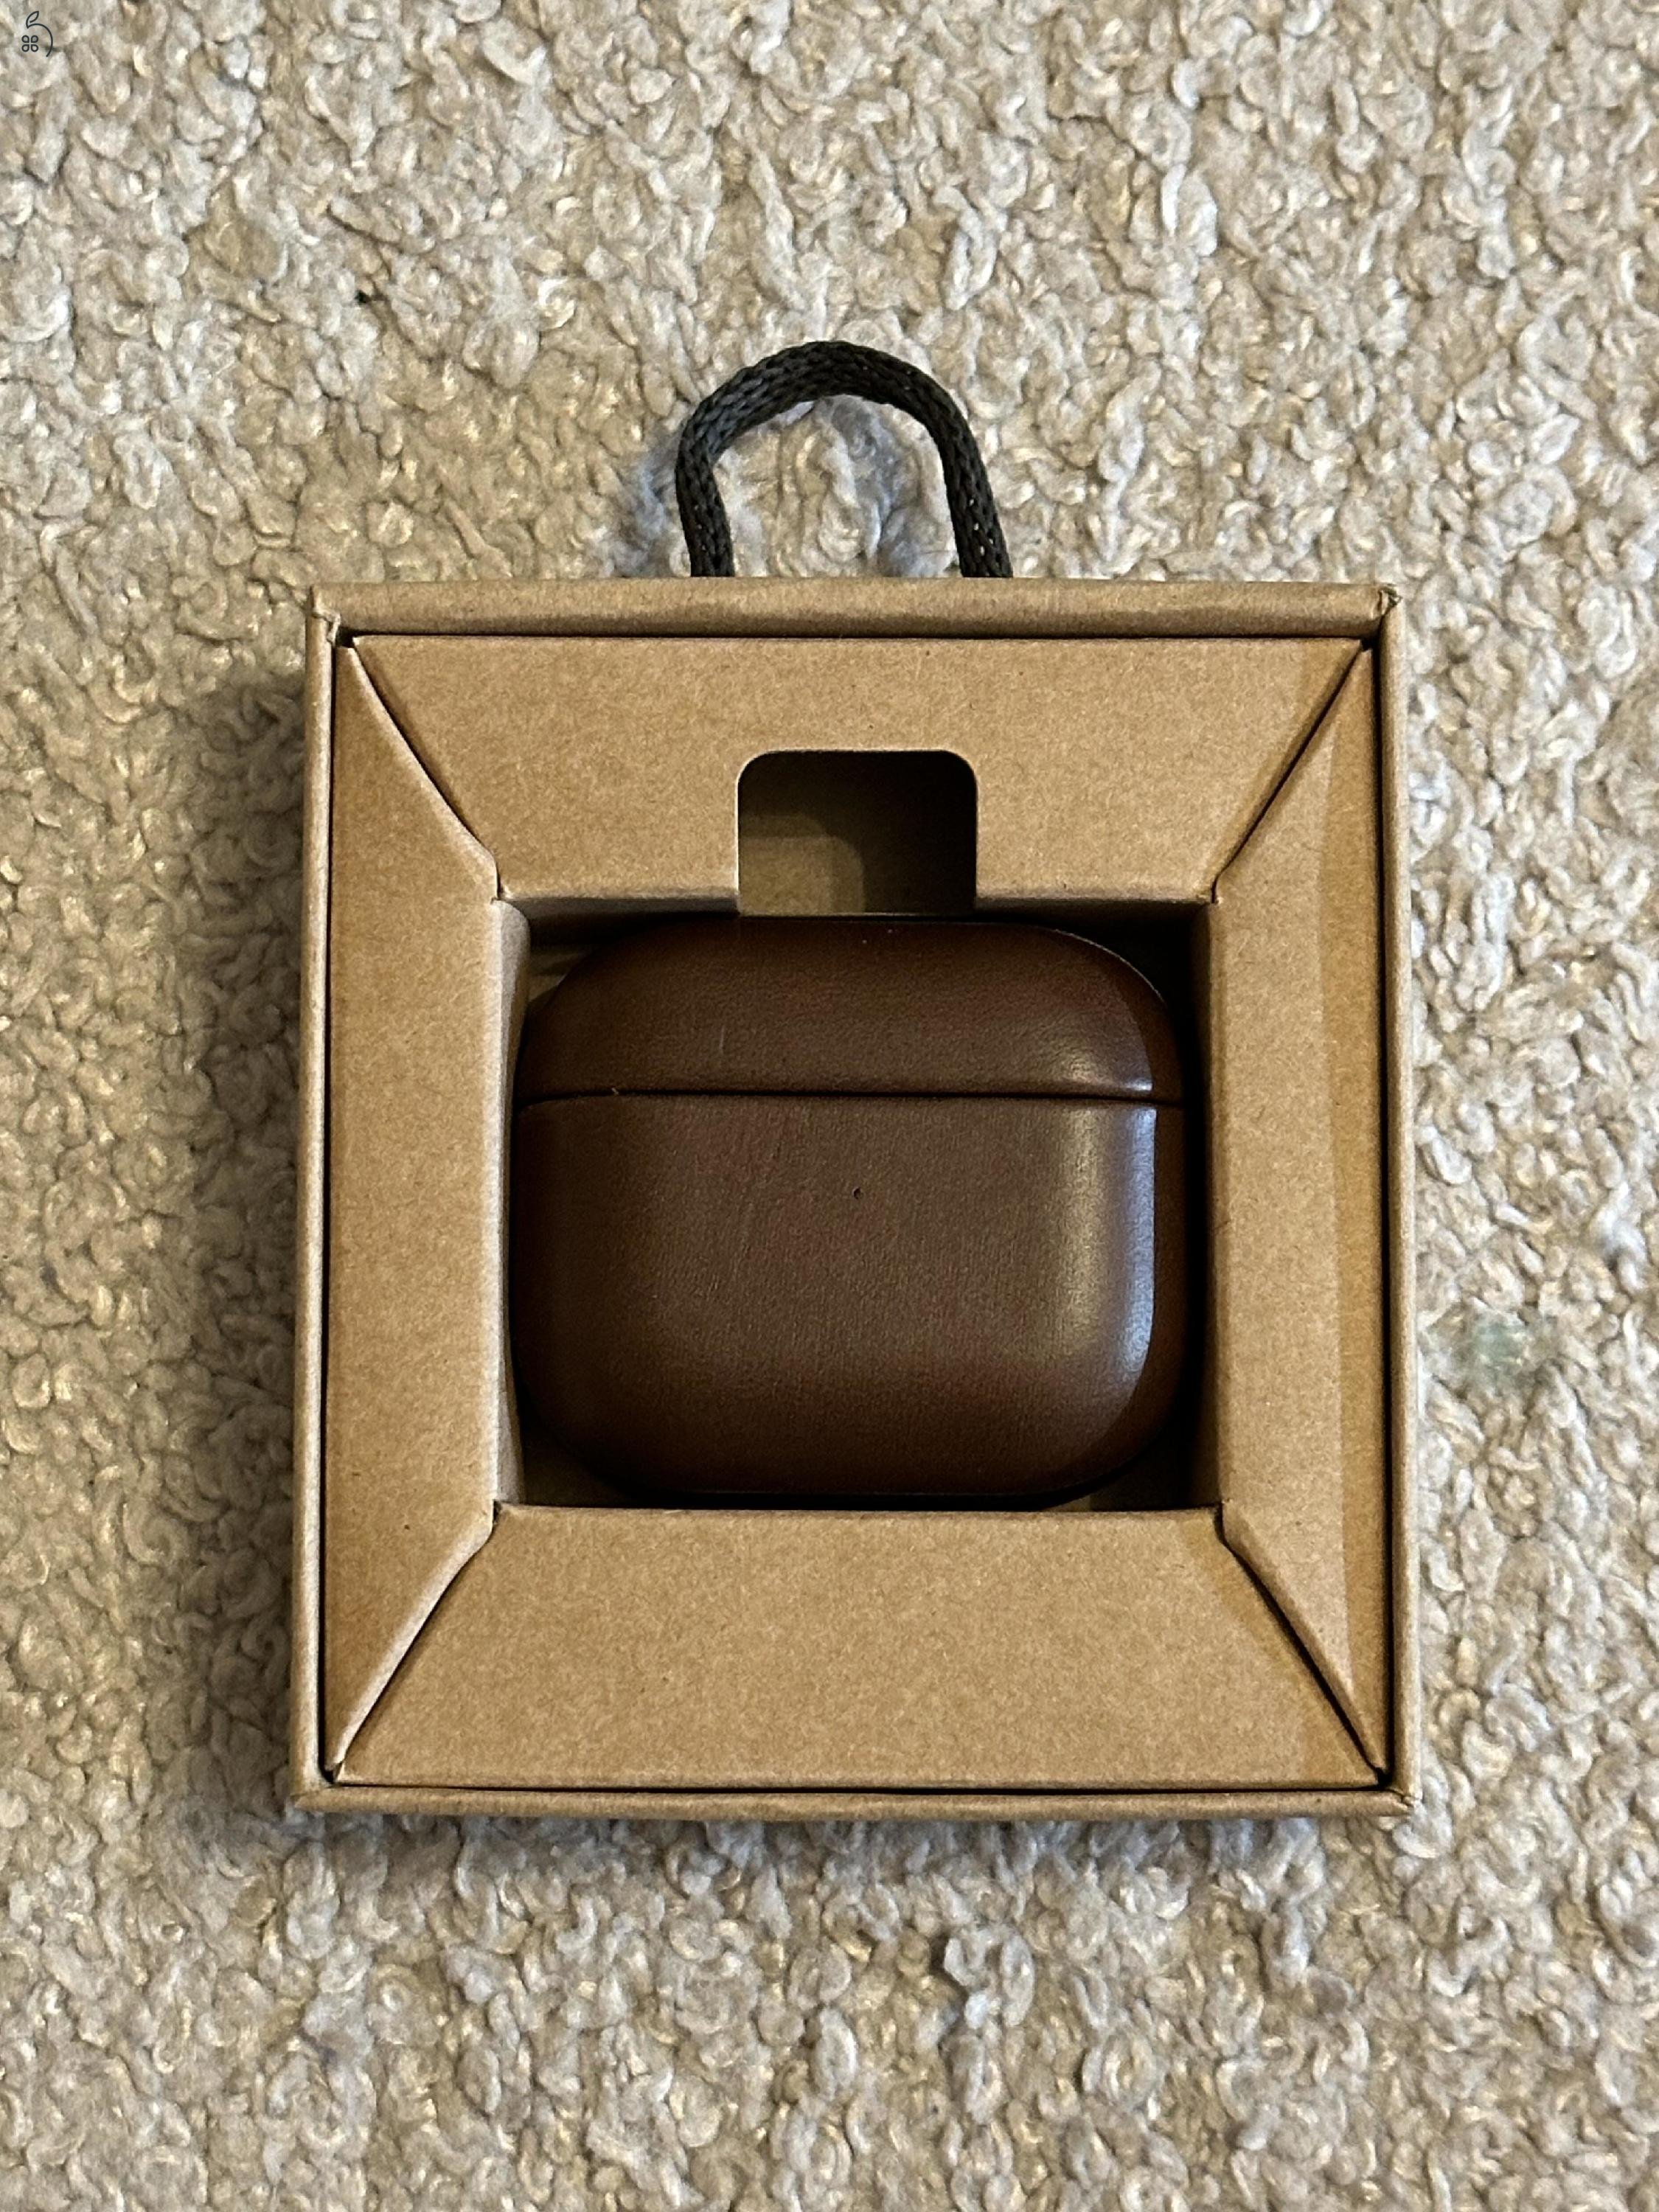 Nomad Modern Leather Case - AirPods 3 tok